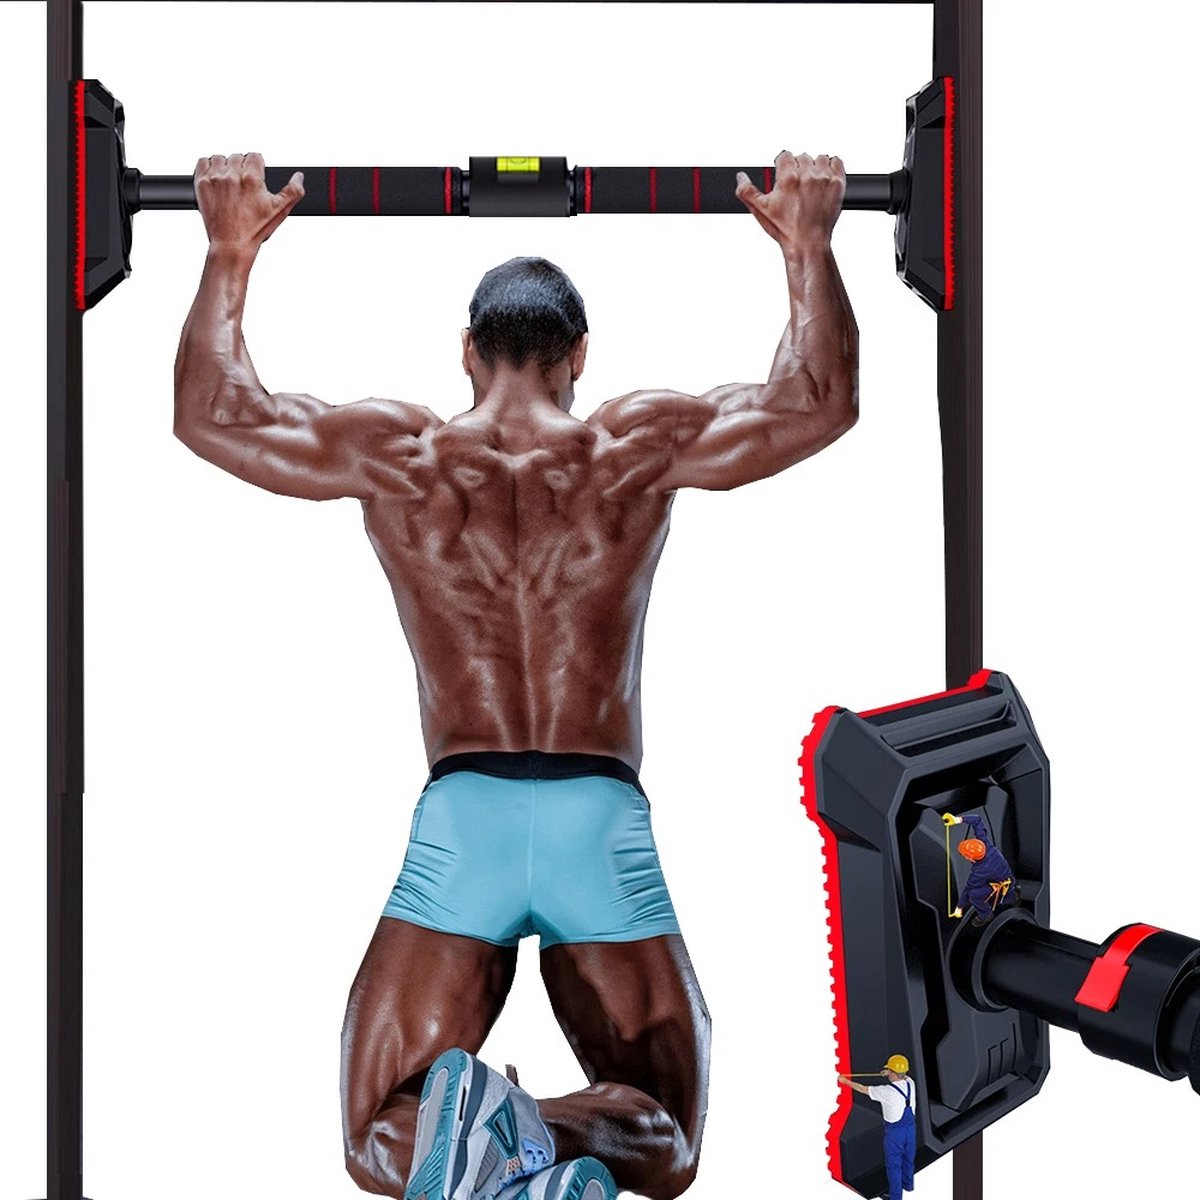 Goodfinds - Verstelbare pull up bar - Thuis fitness - 350KG max - 92-125cm - Fitness deur